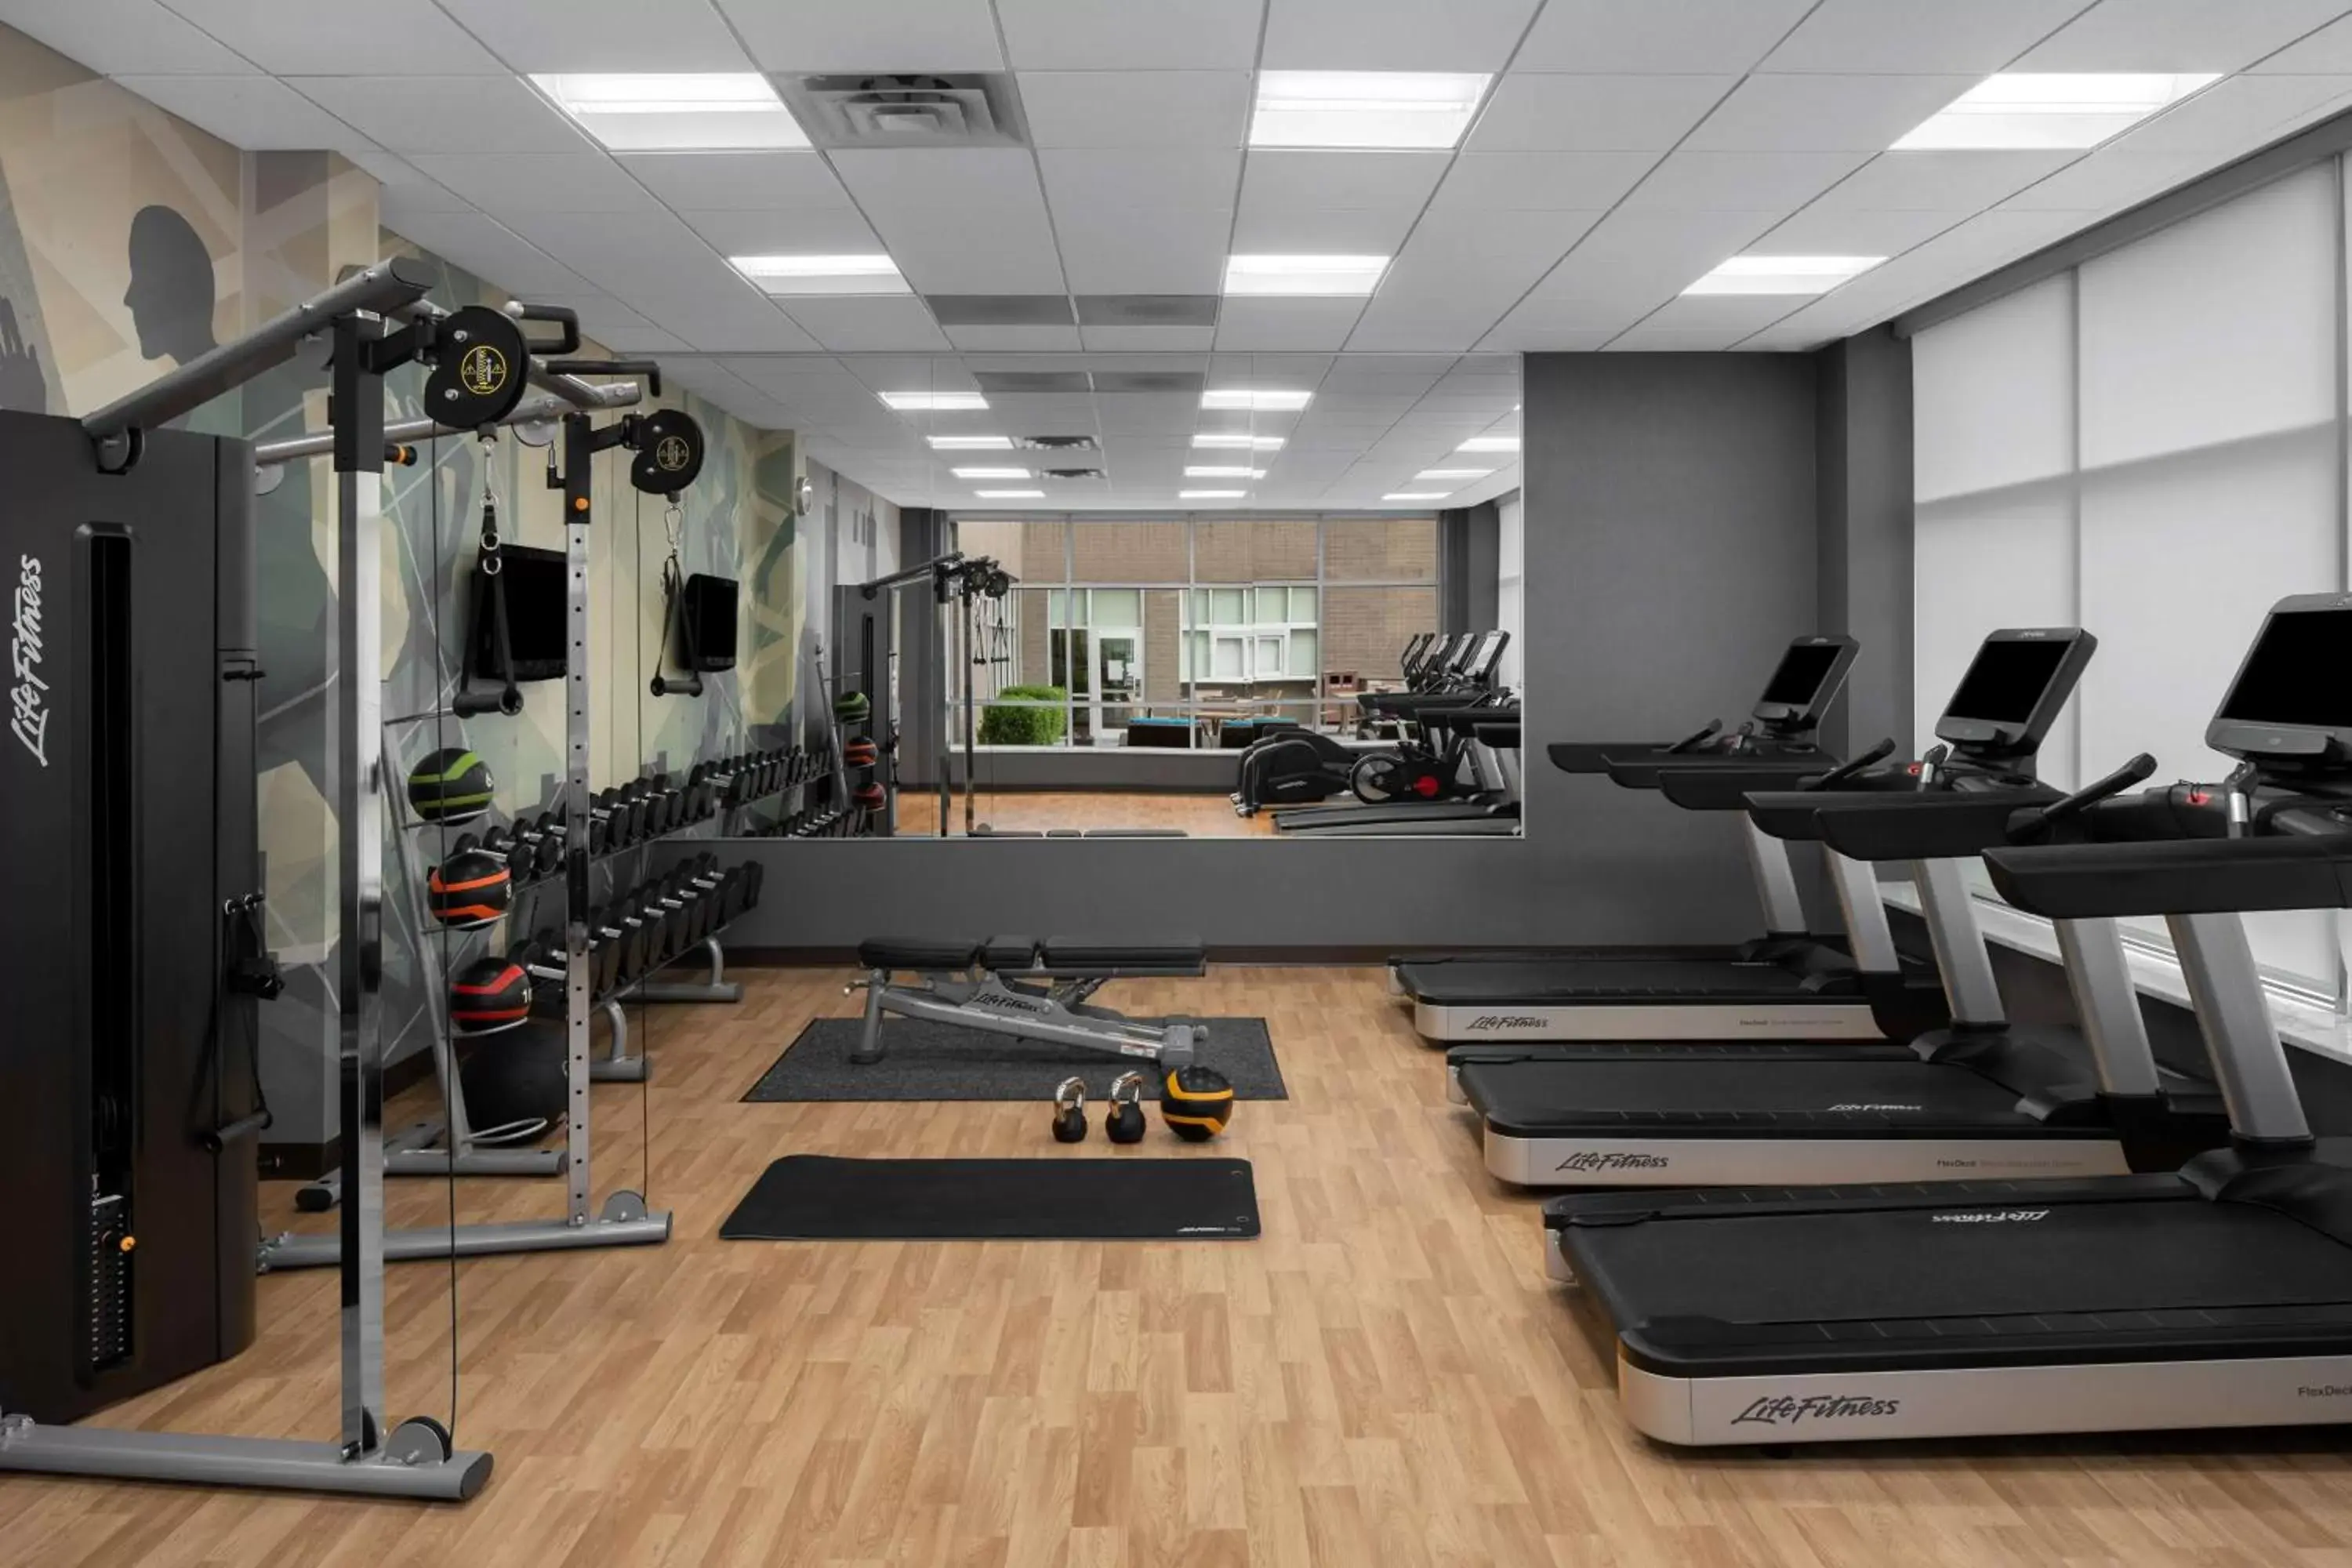 Fitness centre/facilities, Fitness Center/Facilities in Hyatt House Raleigh North Hills